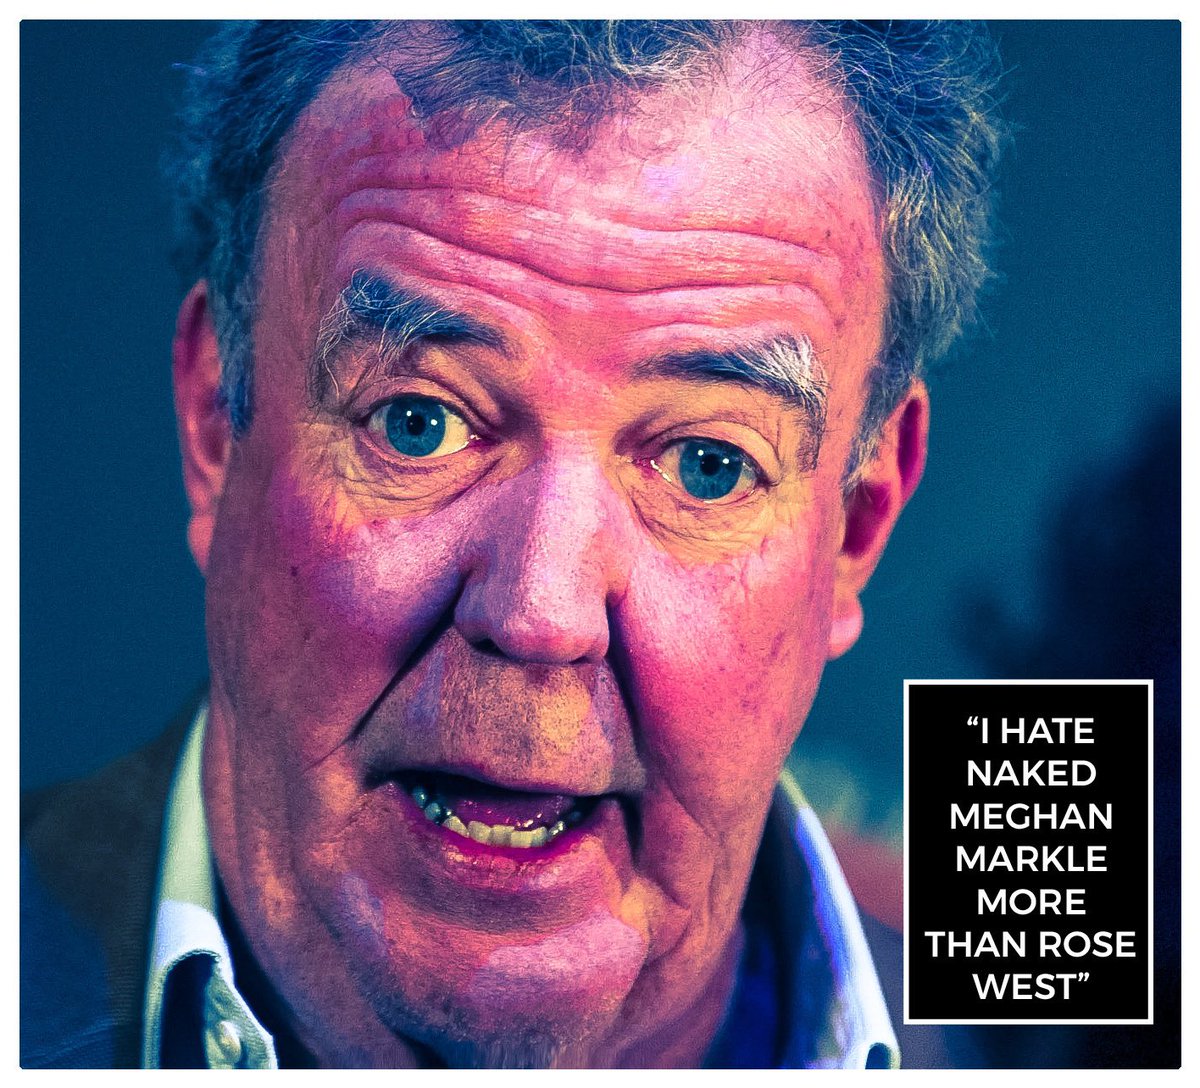 Rise West hater, Jeremy Clarkson, thinks he’s the quintessential English gentleman, the delusional fool. He’s a relic who still wants to slap women’s bottoms (Greta Thunberg).
Bin this creep. #JeremyClarksonisDisgusting  #HarryTheInterview